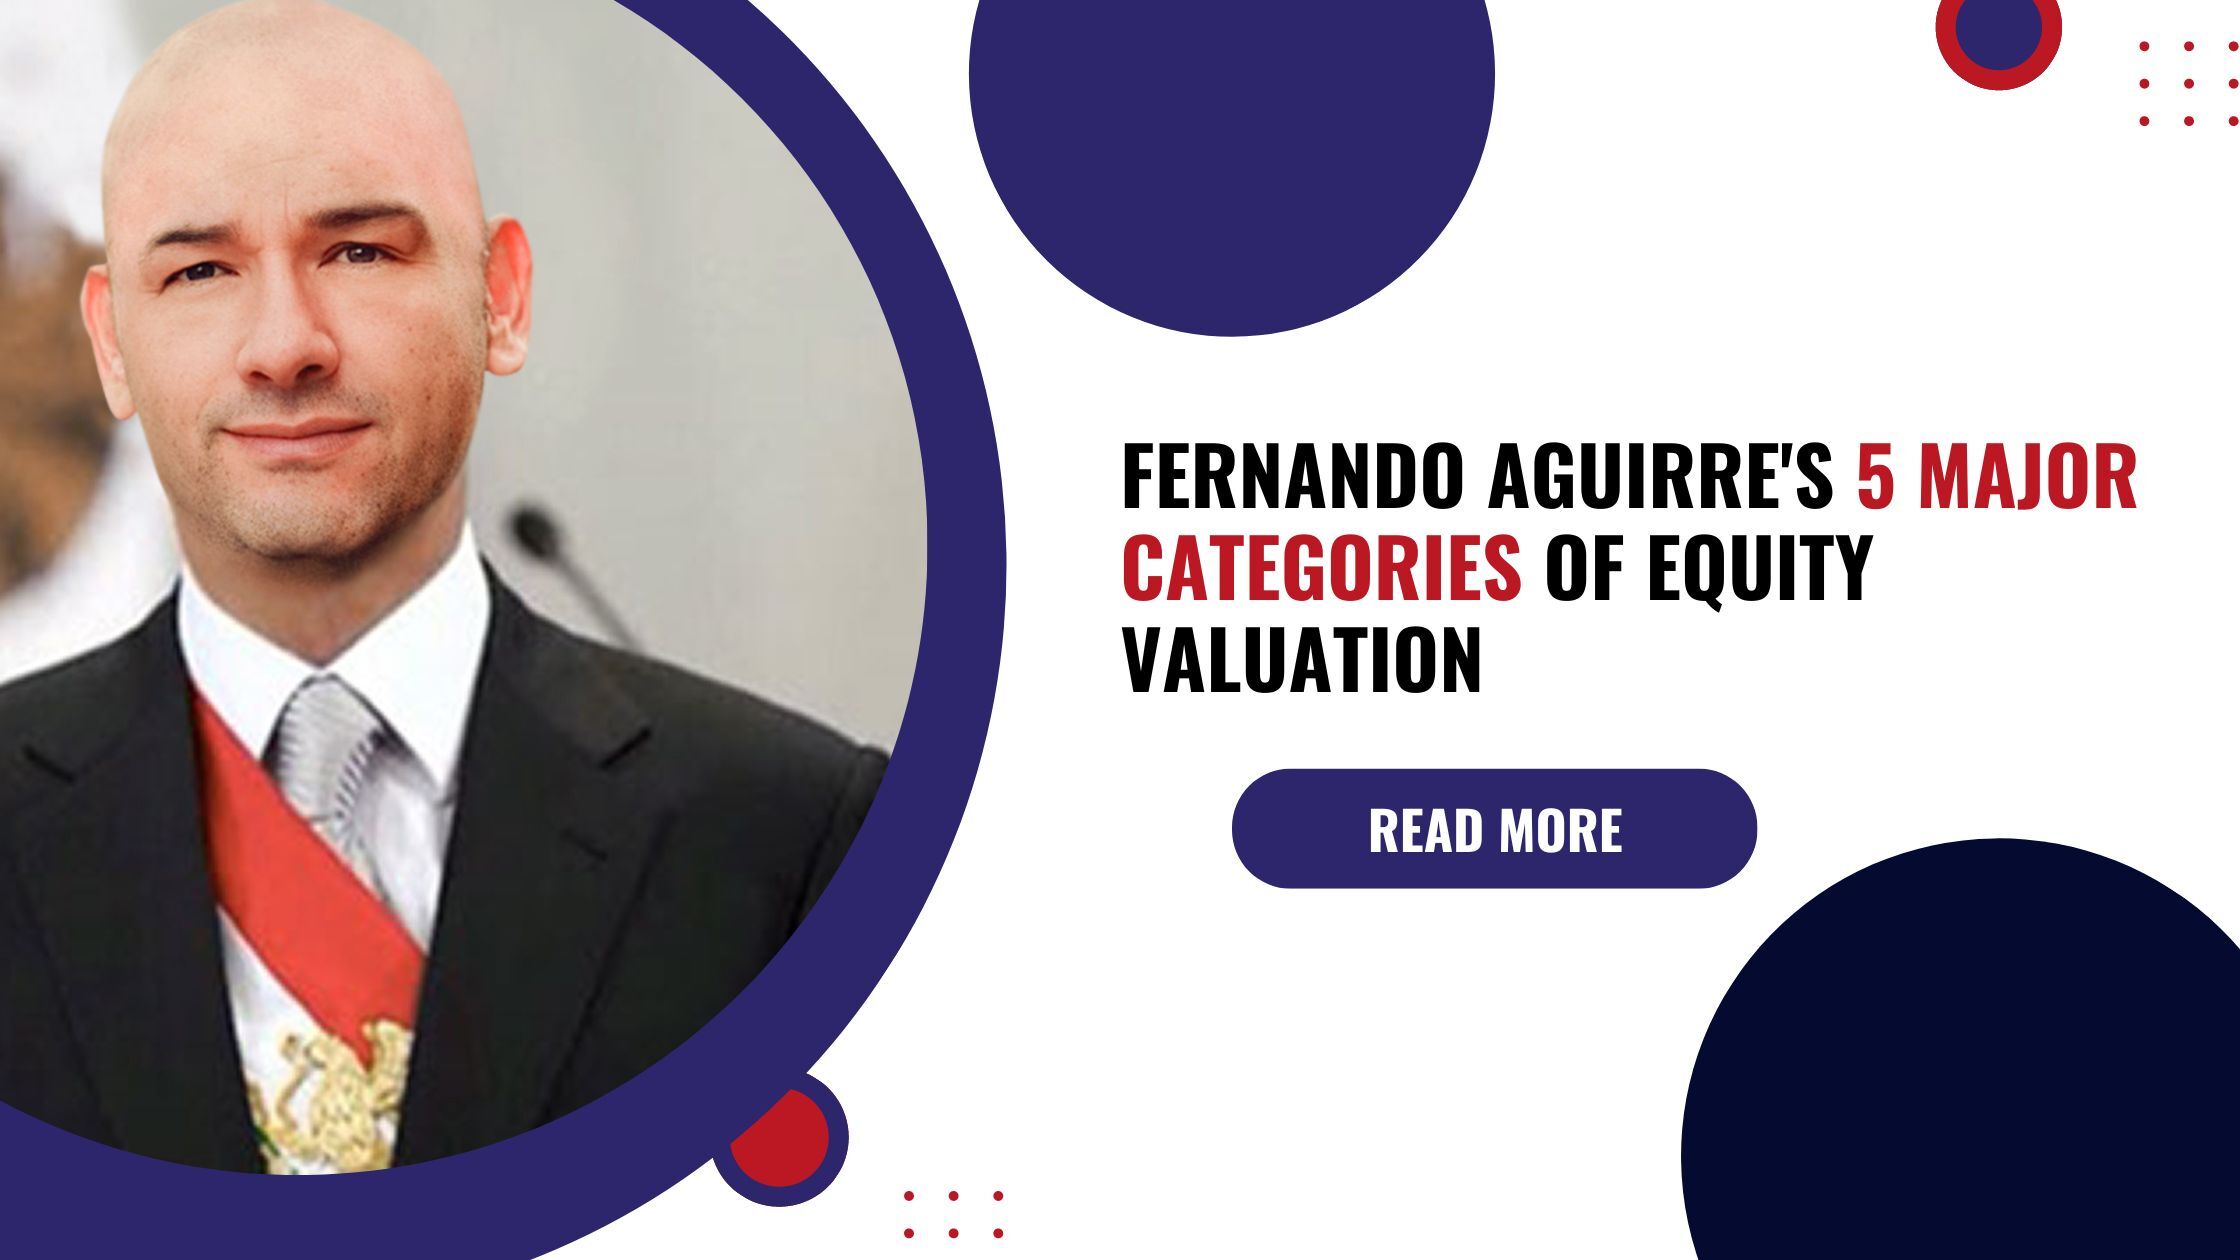 Fernando Aguirre's 5 Major Categories of Equity Valuation